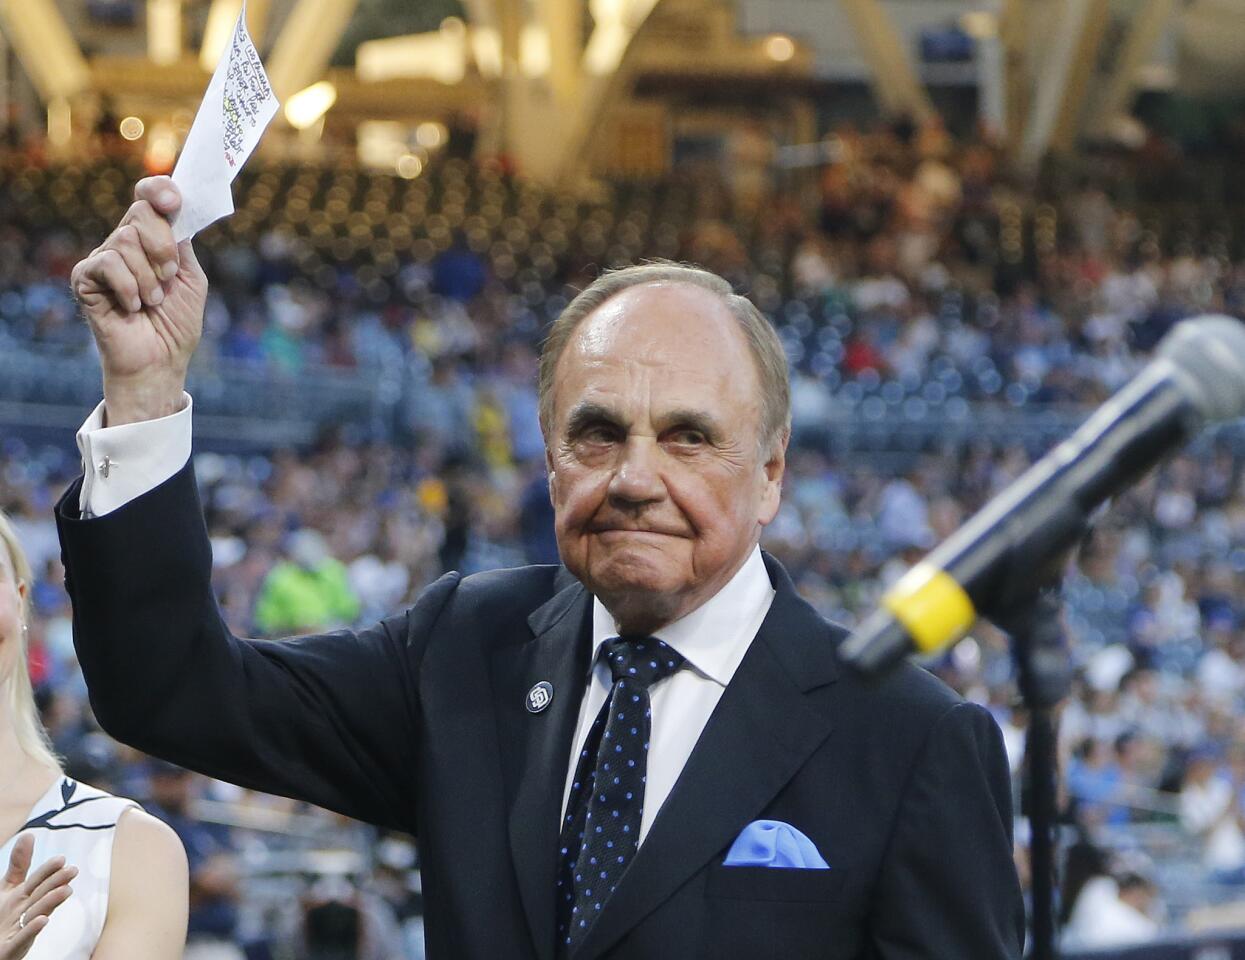 In this Sept. 29, 2016 photo San Diego Padres broadcaster Dick Enberg waves to crowd at a retirement ceremony prior to the Padres' final home baseball game of the season. Enberg died Dec. 21, 2017, at his home in La Jolla, Calif., at age 82. Read more.